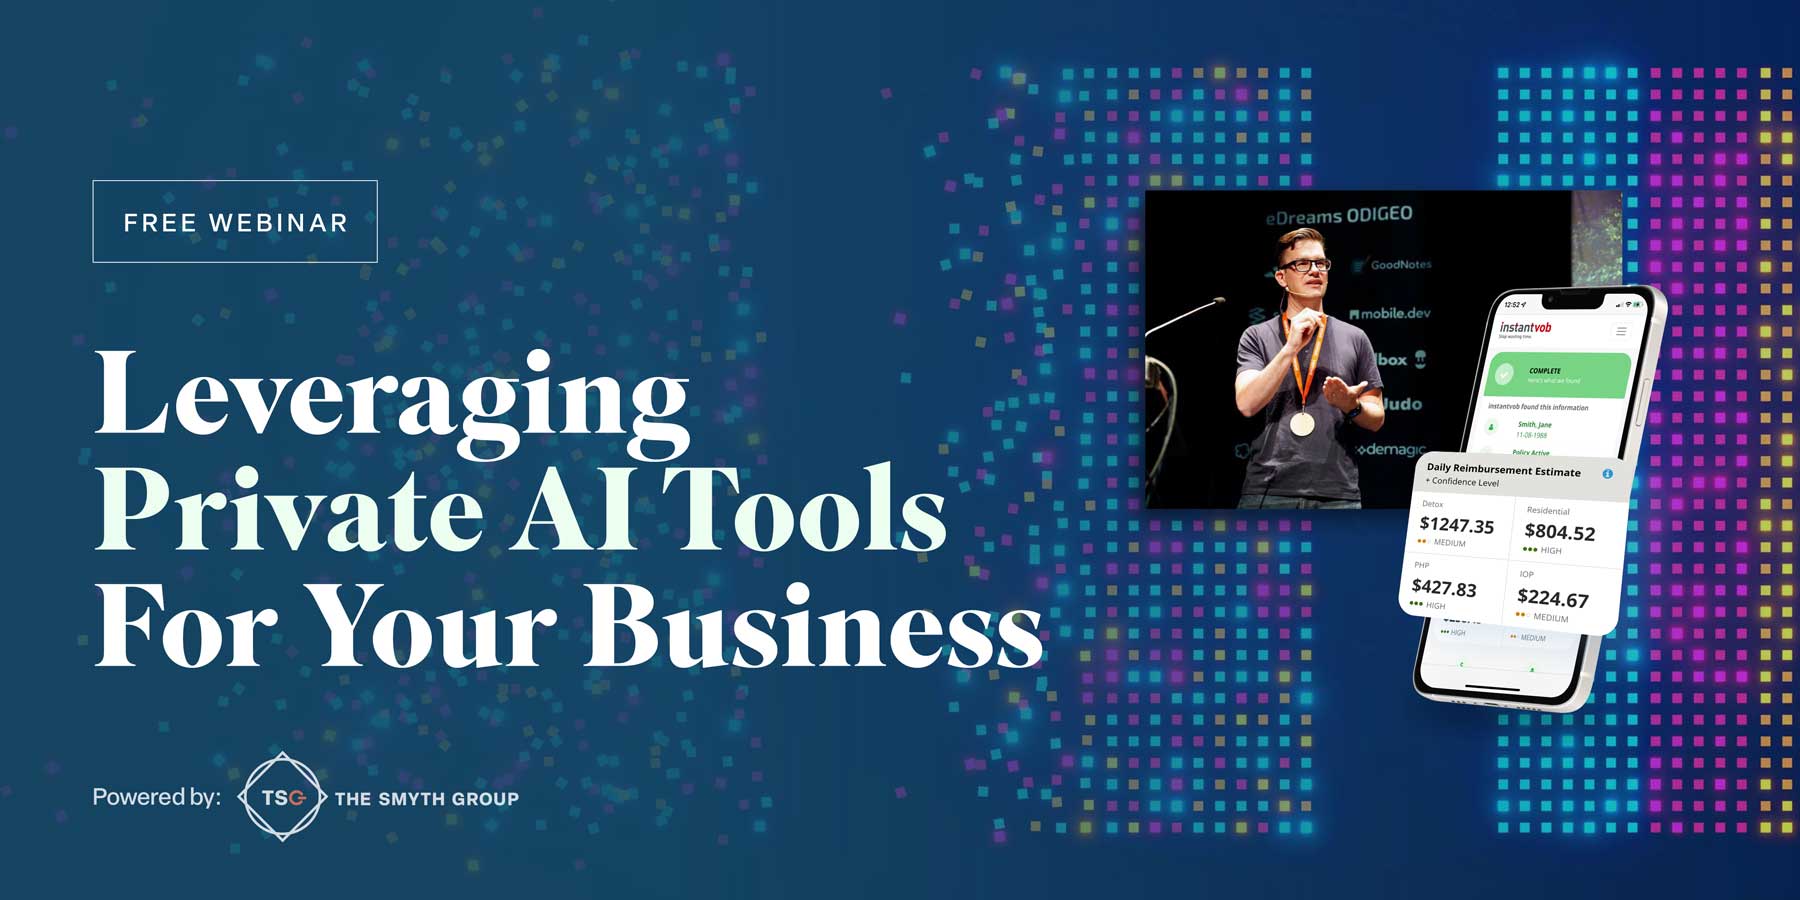 Webinar Invitation Graphic: Leveraging Private AI Tools For Your Business